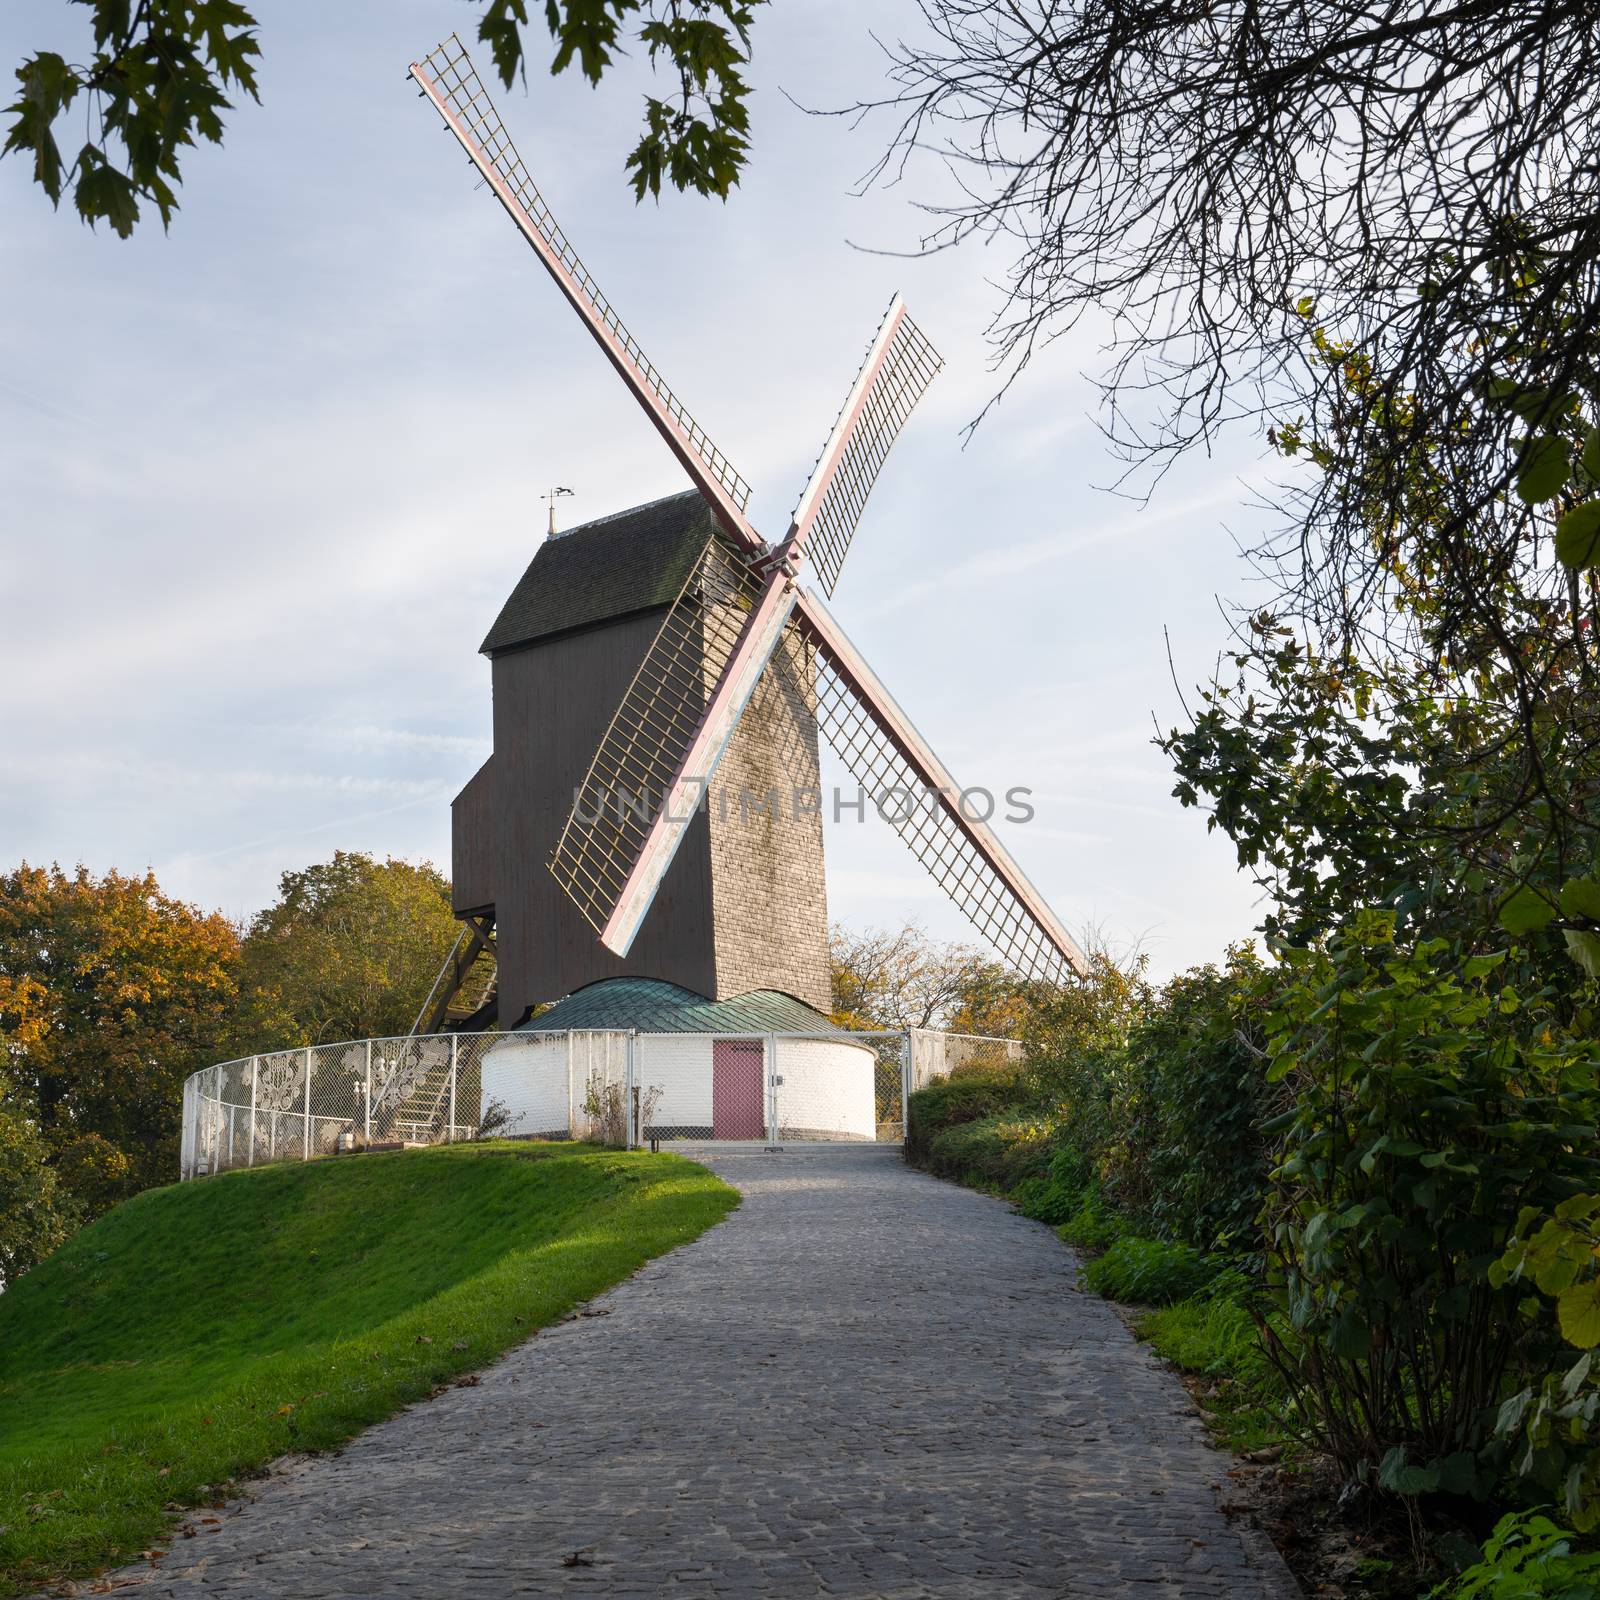 Historic windmill close to the canals of Bruges with autumnal colored trees, Belgium